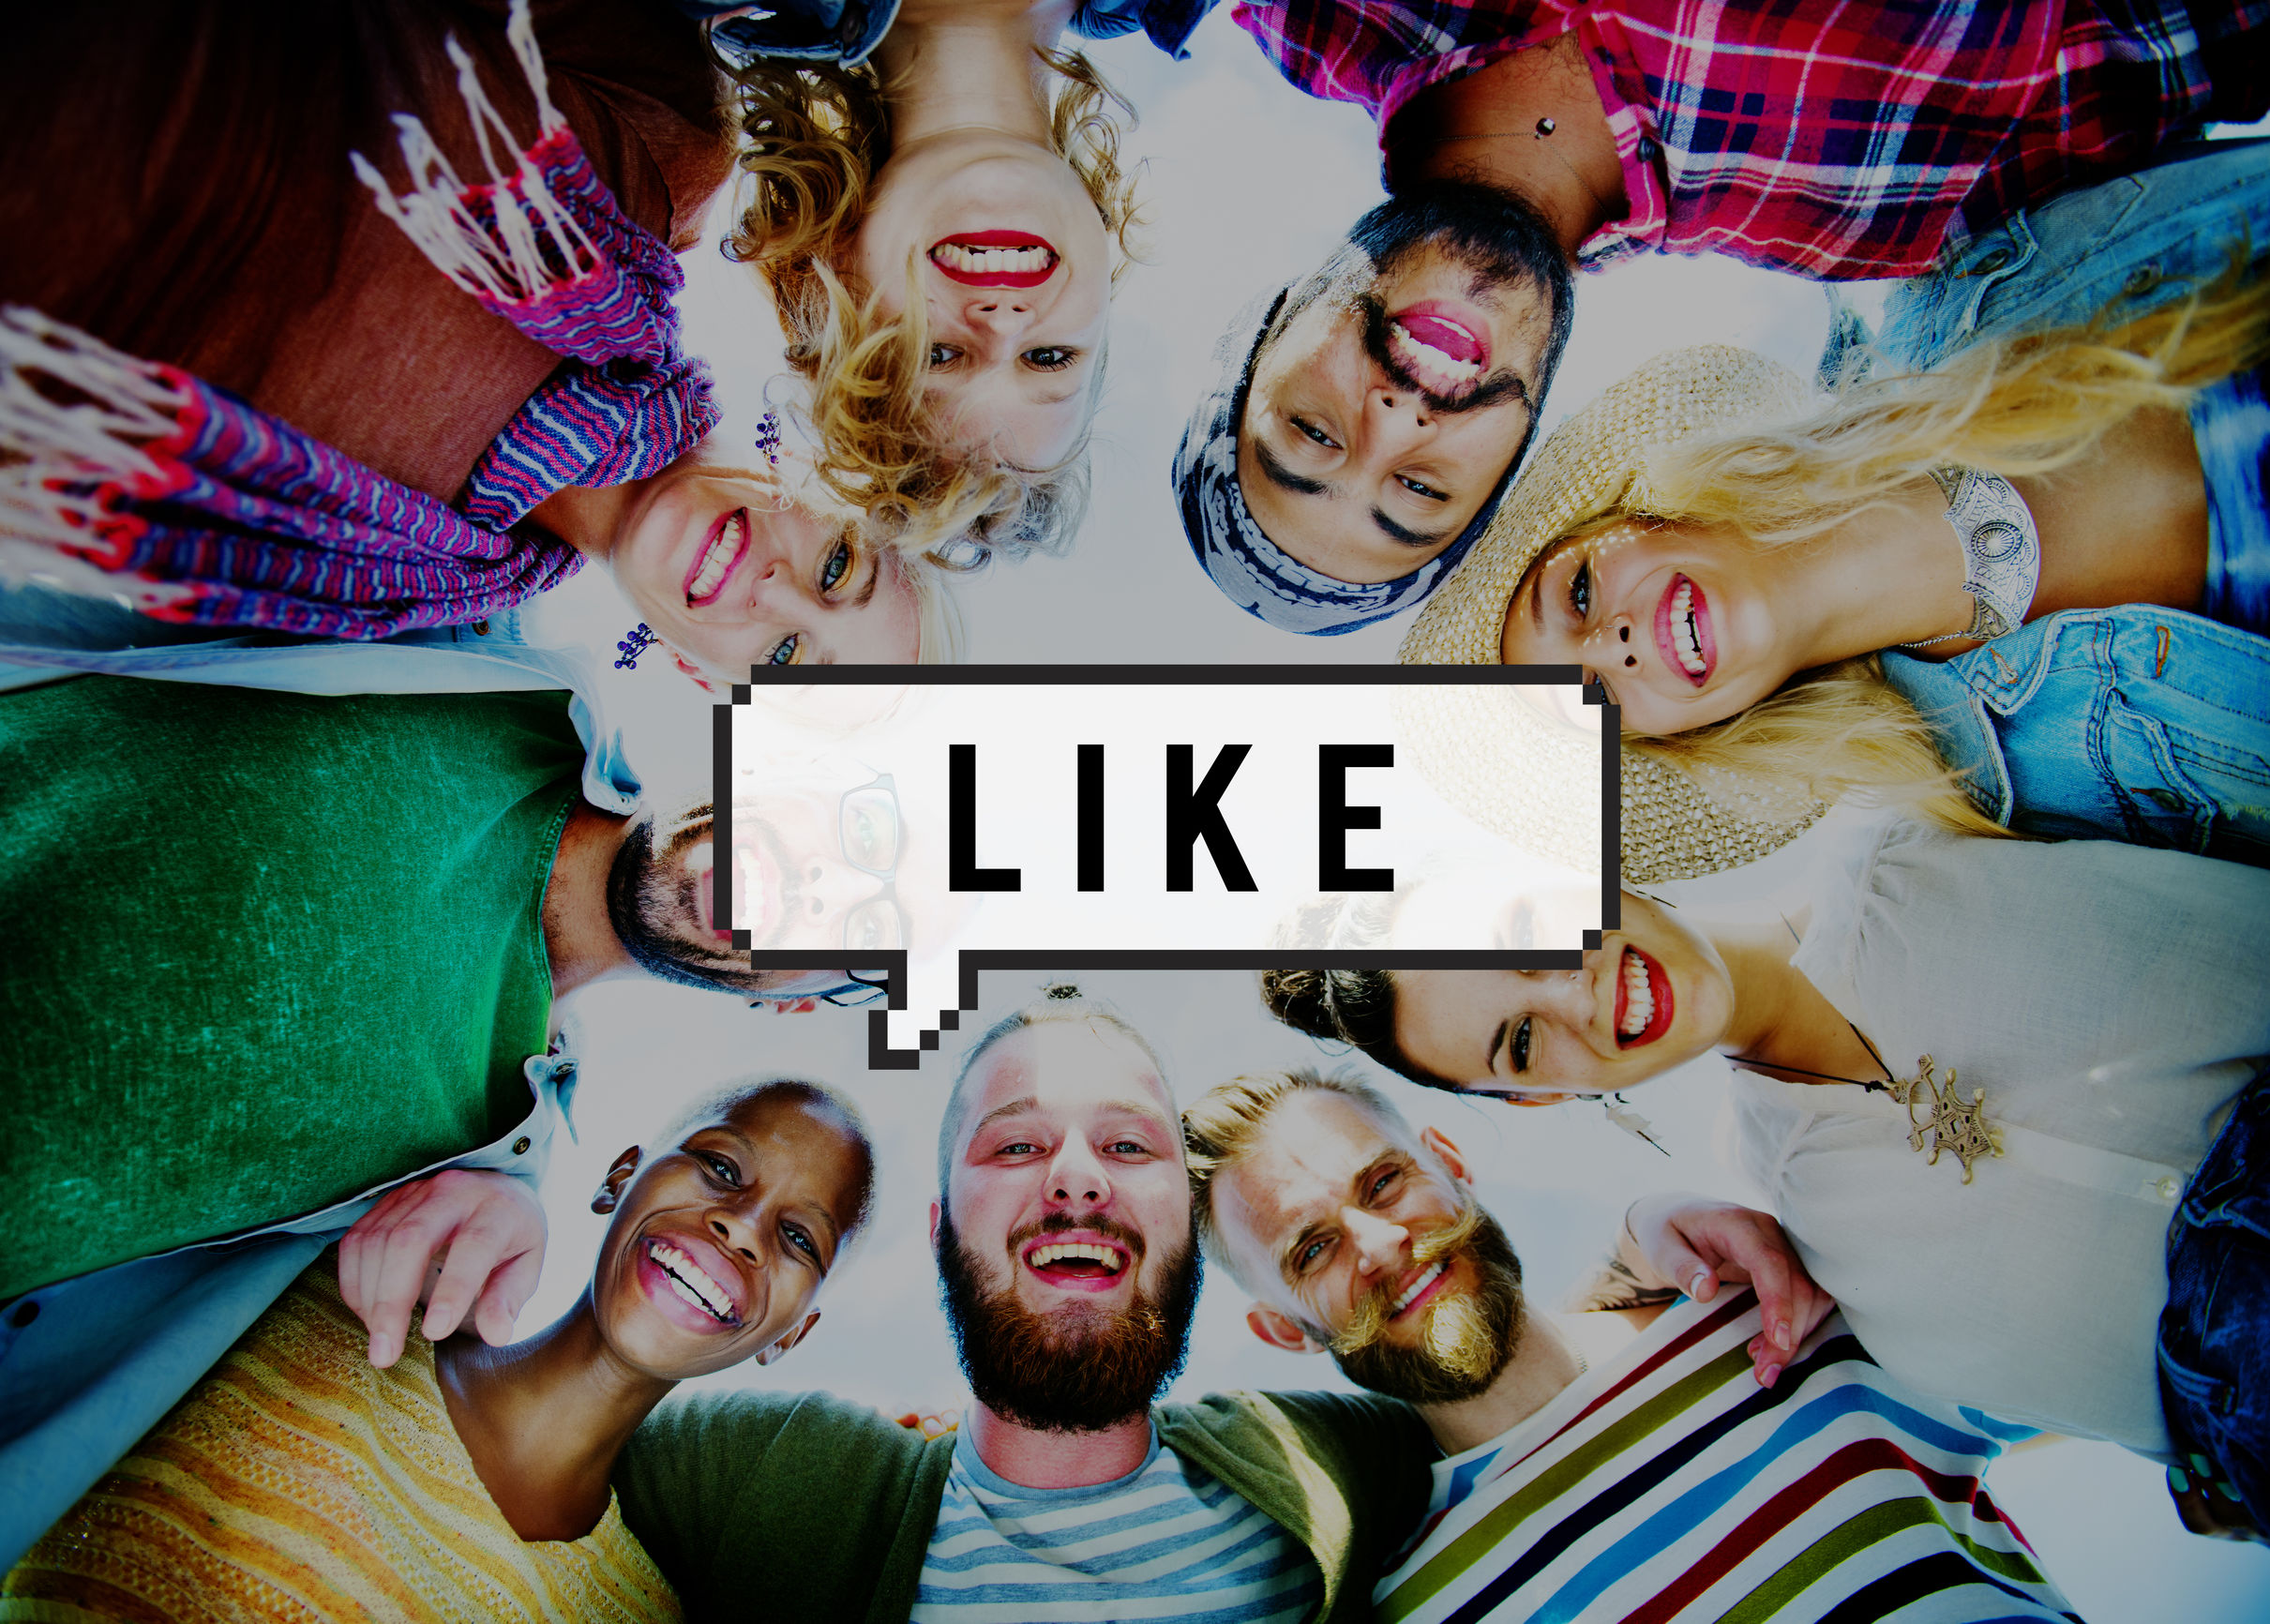 The Power of the "Like" Button